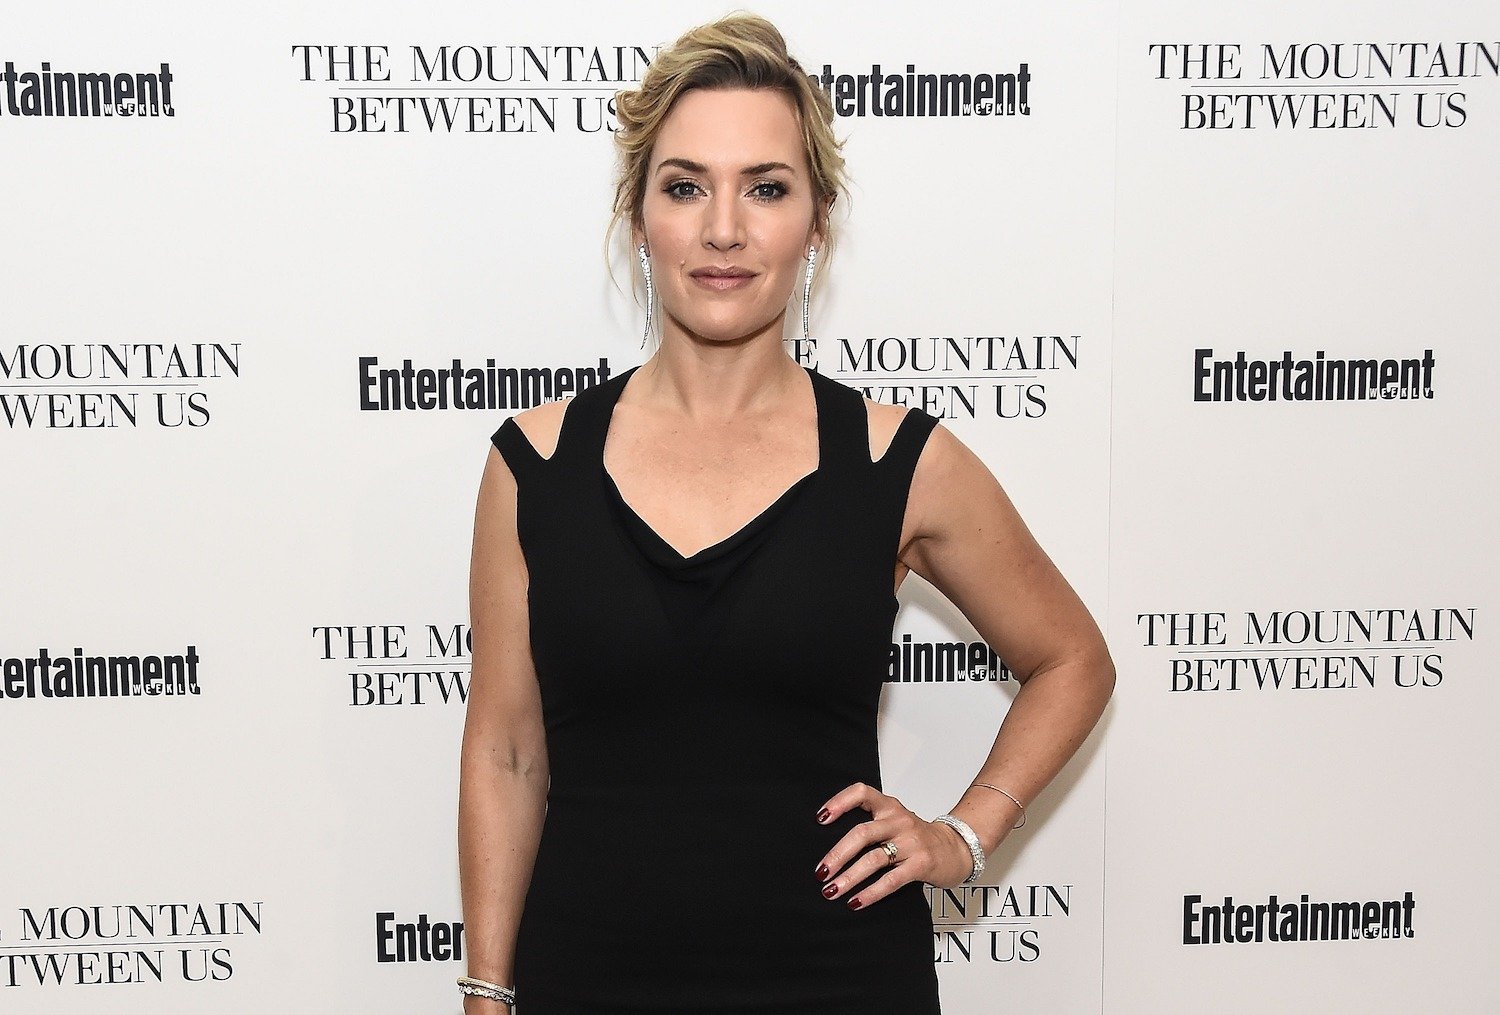 Kate Winslet attends the screening of 'The Mountain Between Us' on September 26, 2017 in New York City